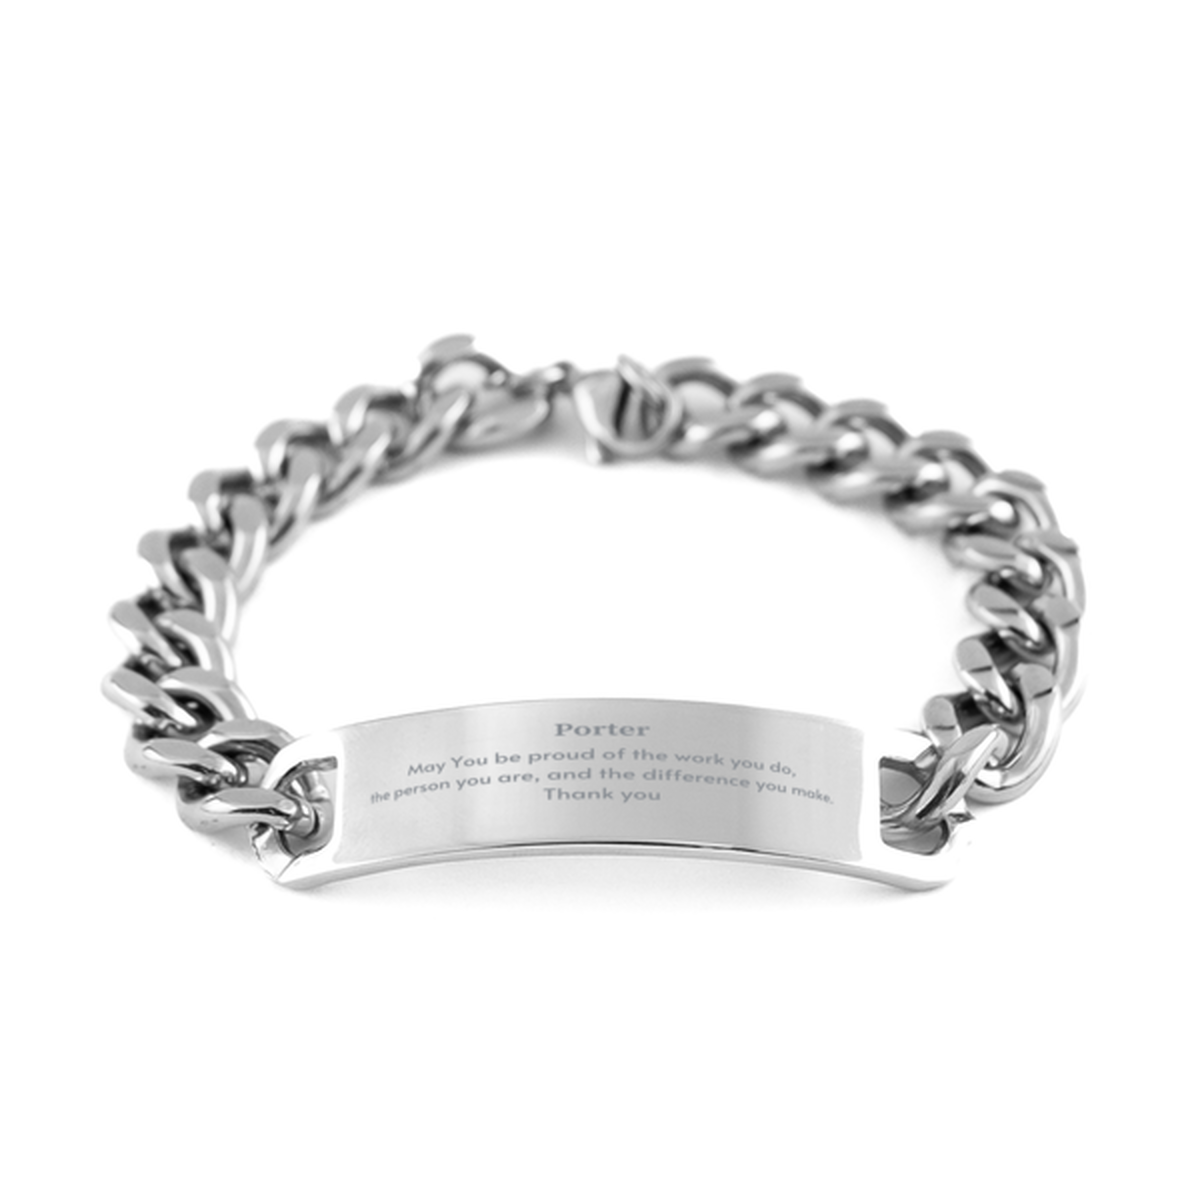 Heartwarming Cuban Chain Stainless Steel Bracelet Retirement Coworkers Gifts for Porter, Porter May You be proud of the work you do, the person you are Gifts for Boss Men Women Friends